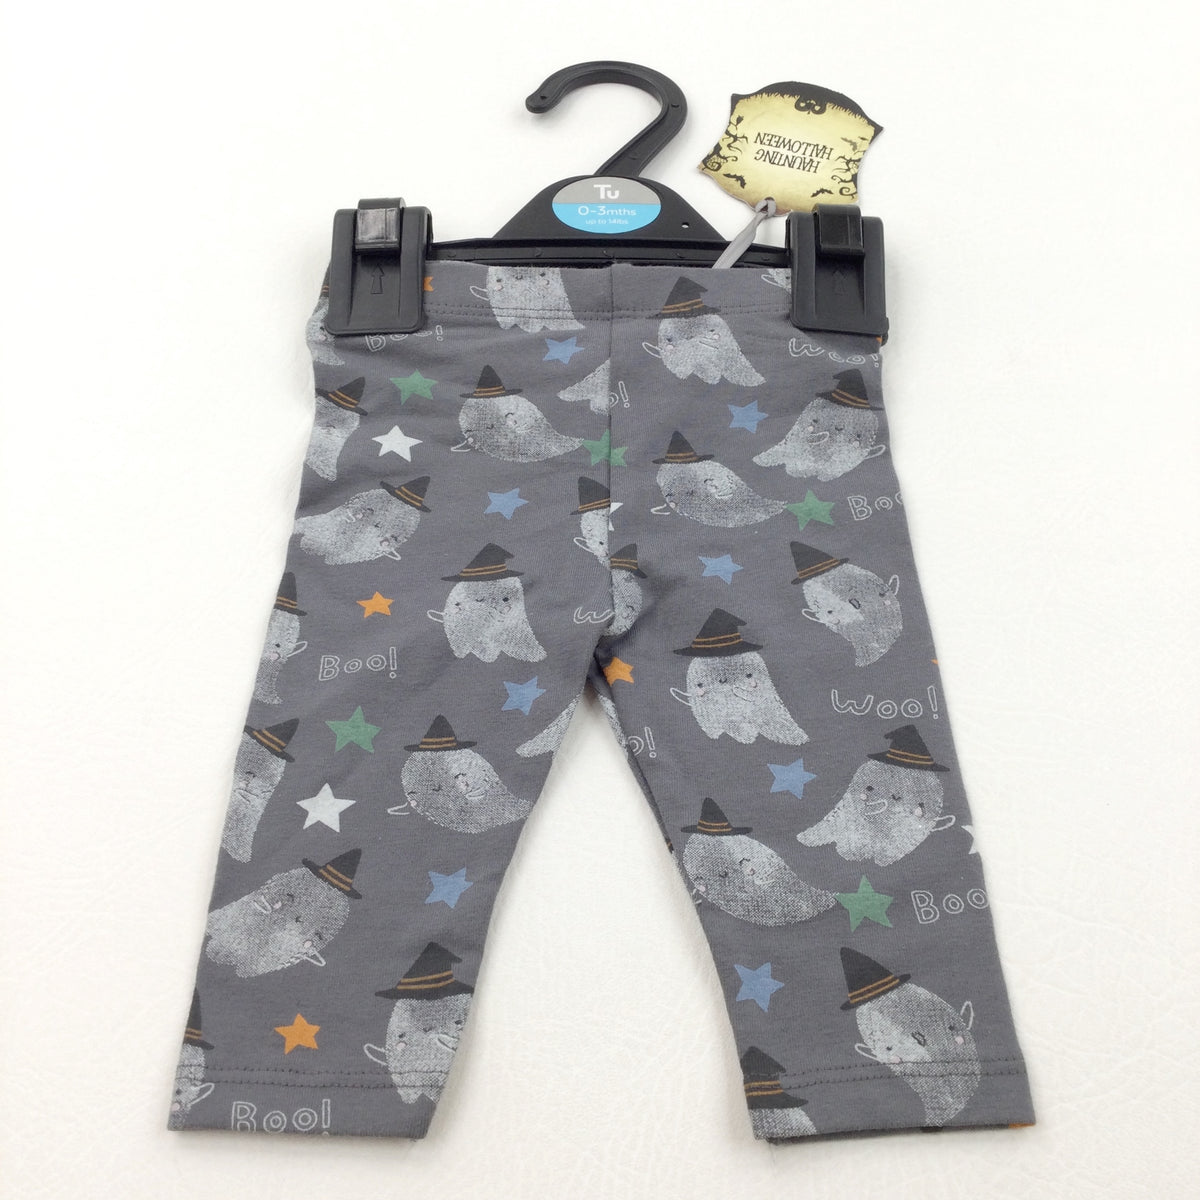 NEW** 'Boo' Ghosts & Witches Hats Grey Leggings - Boys/Girls 0-3